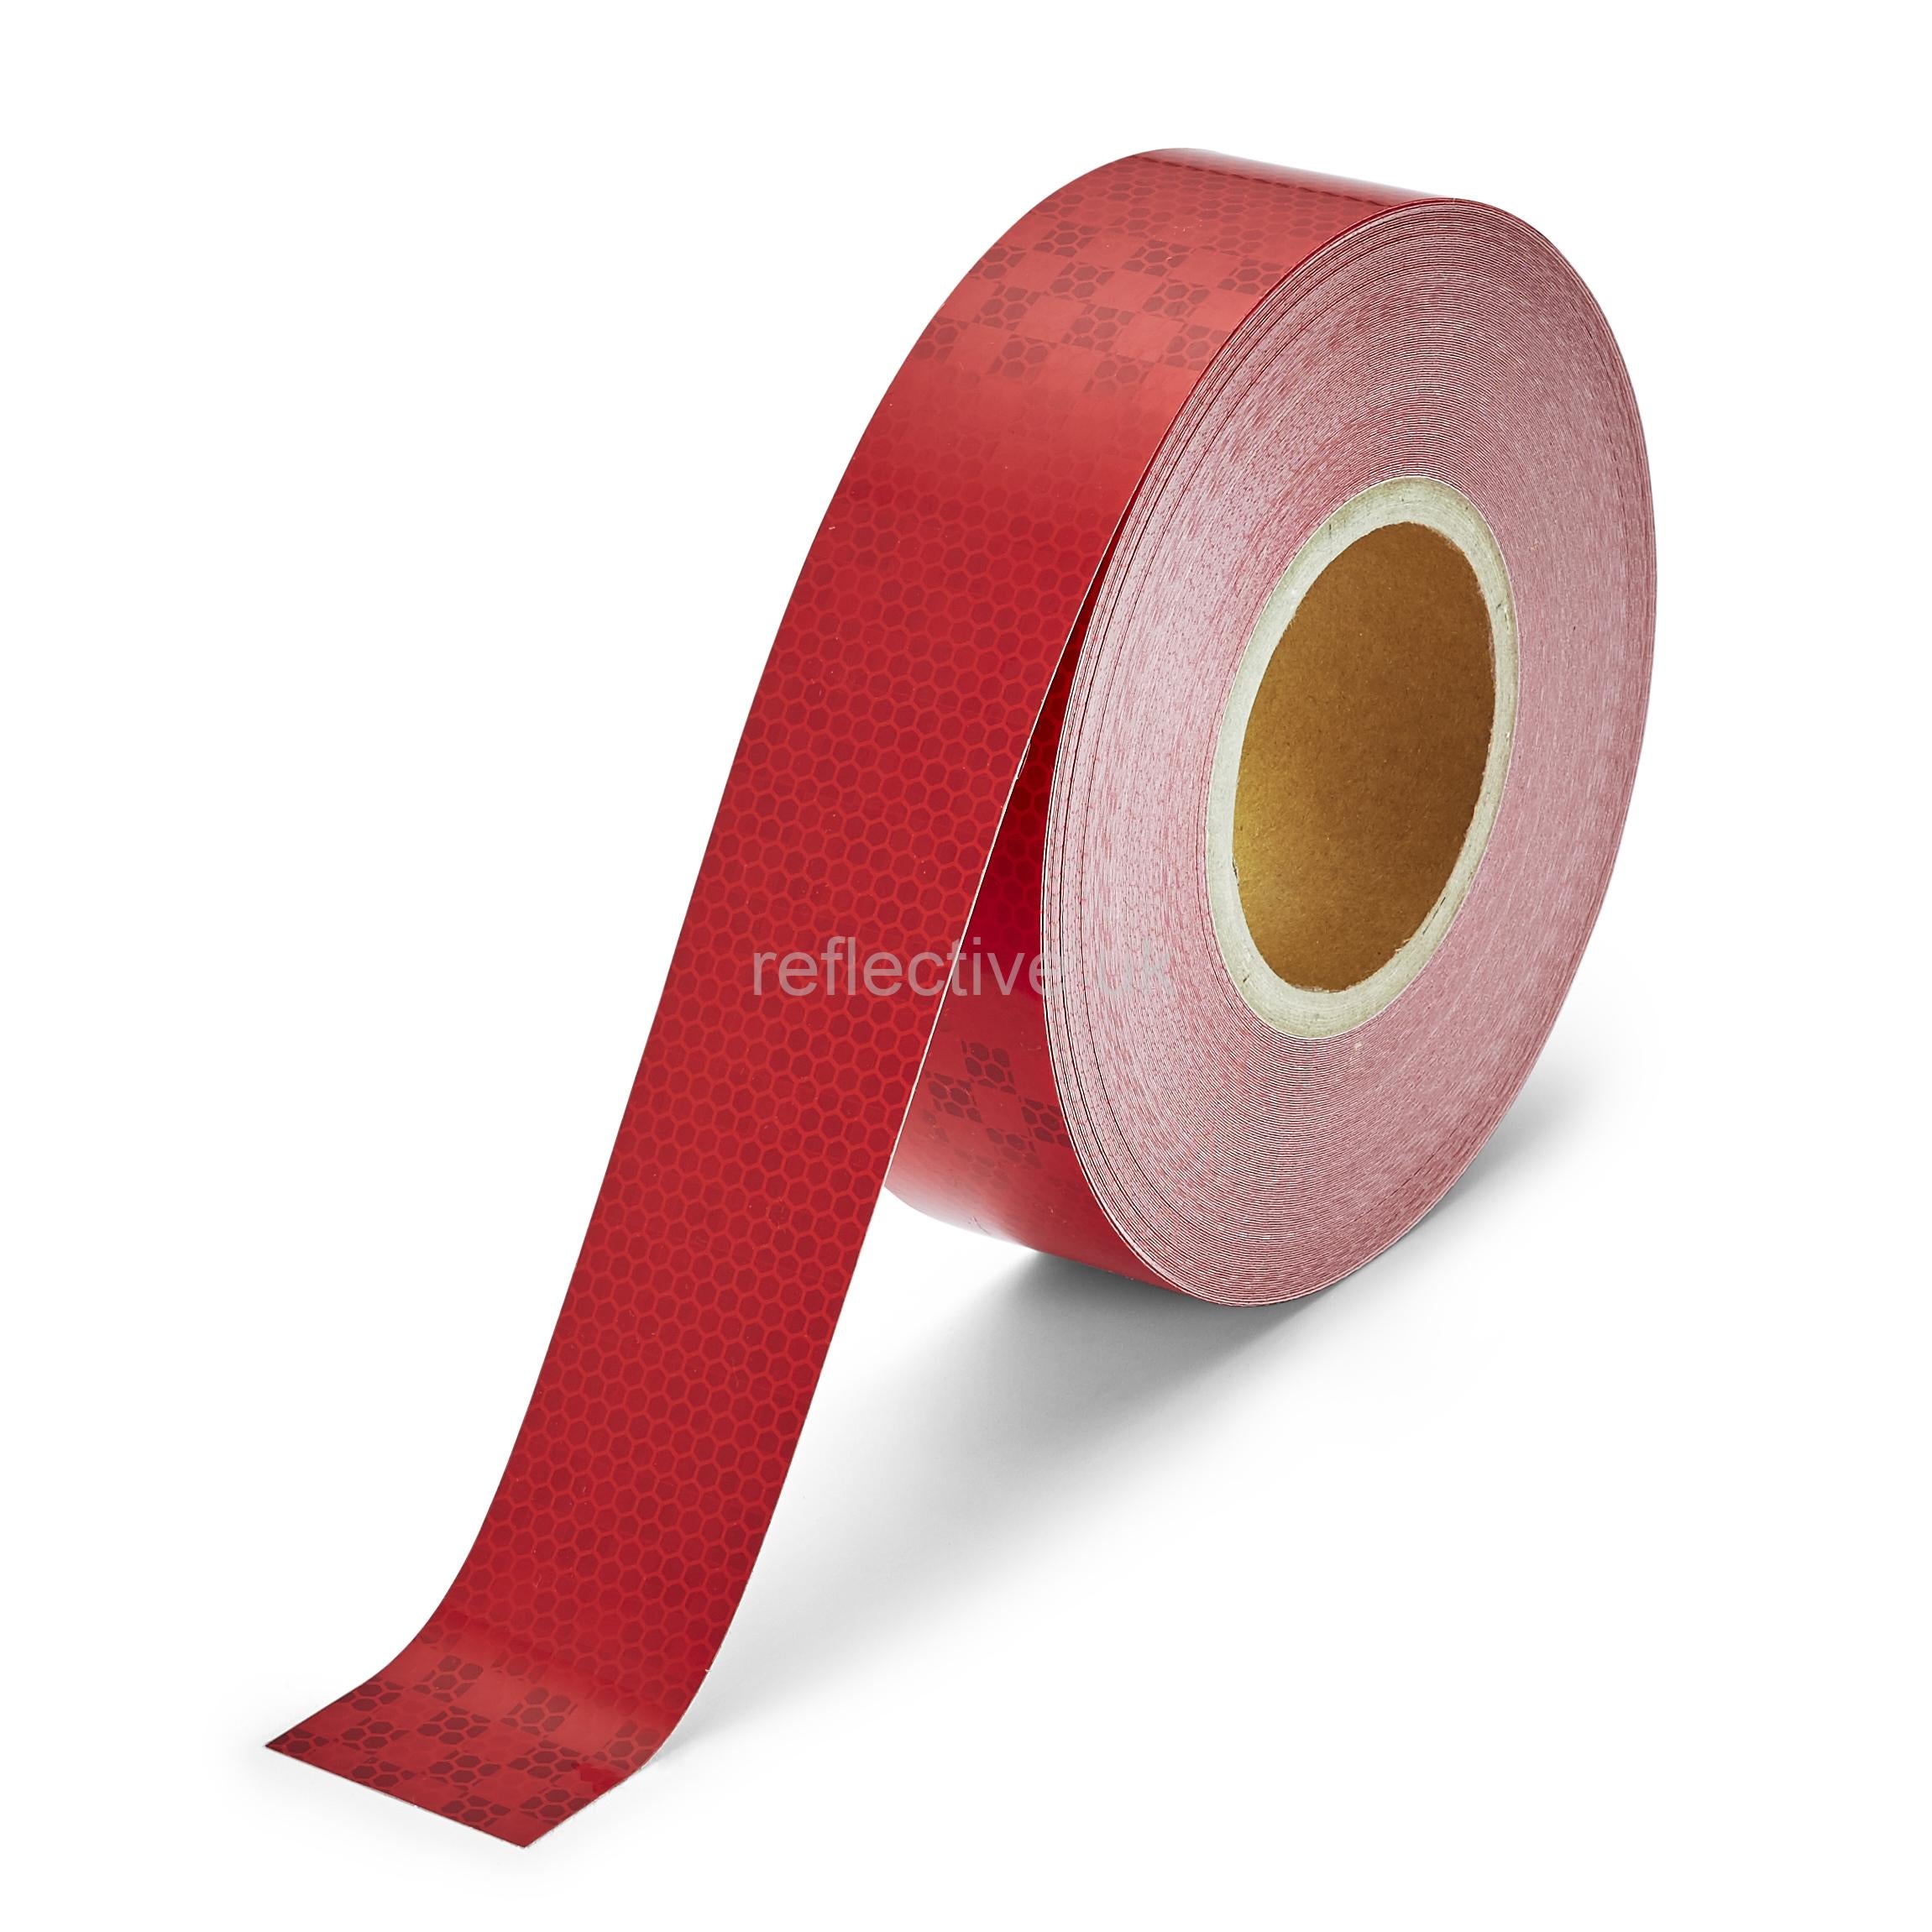 High Intensity Reflective Tape - RED